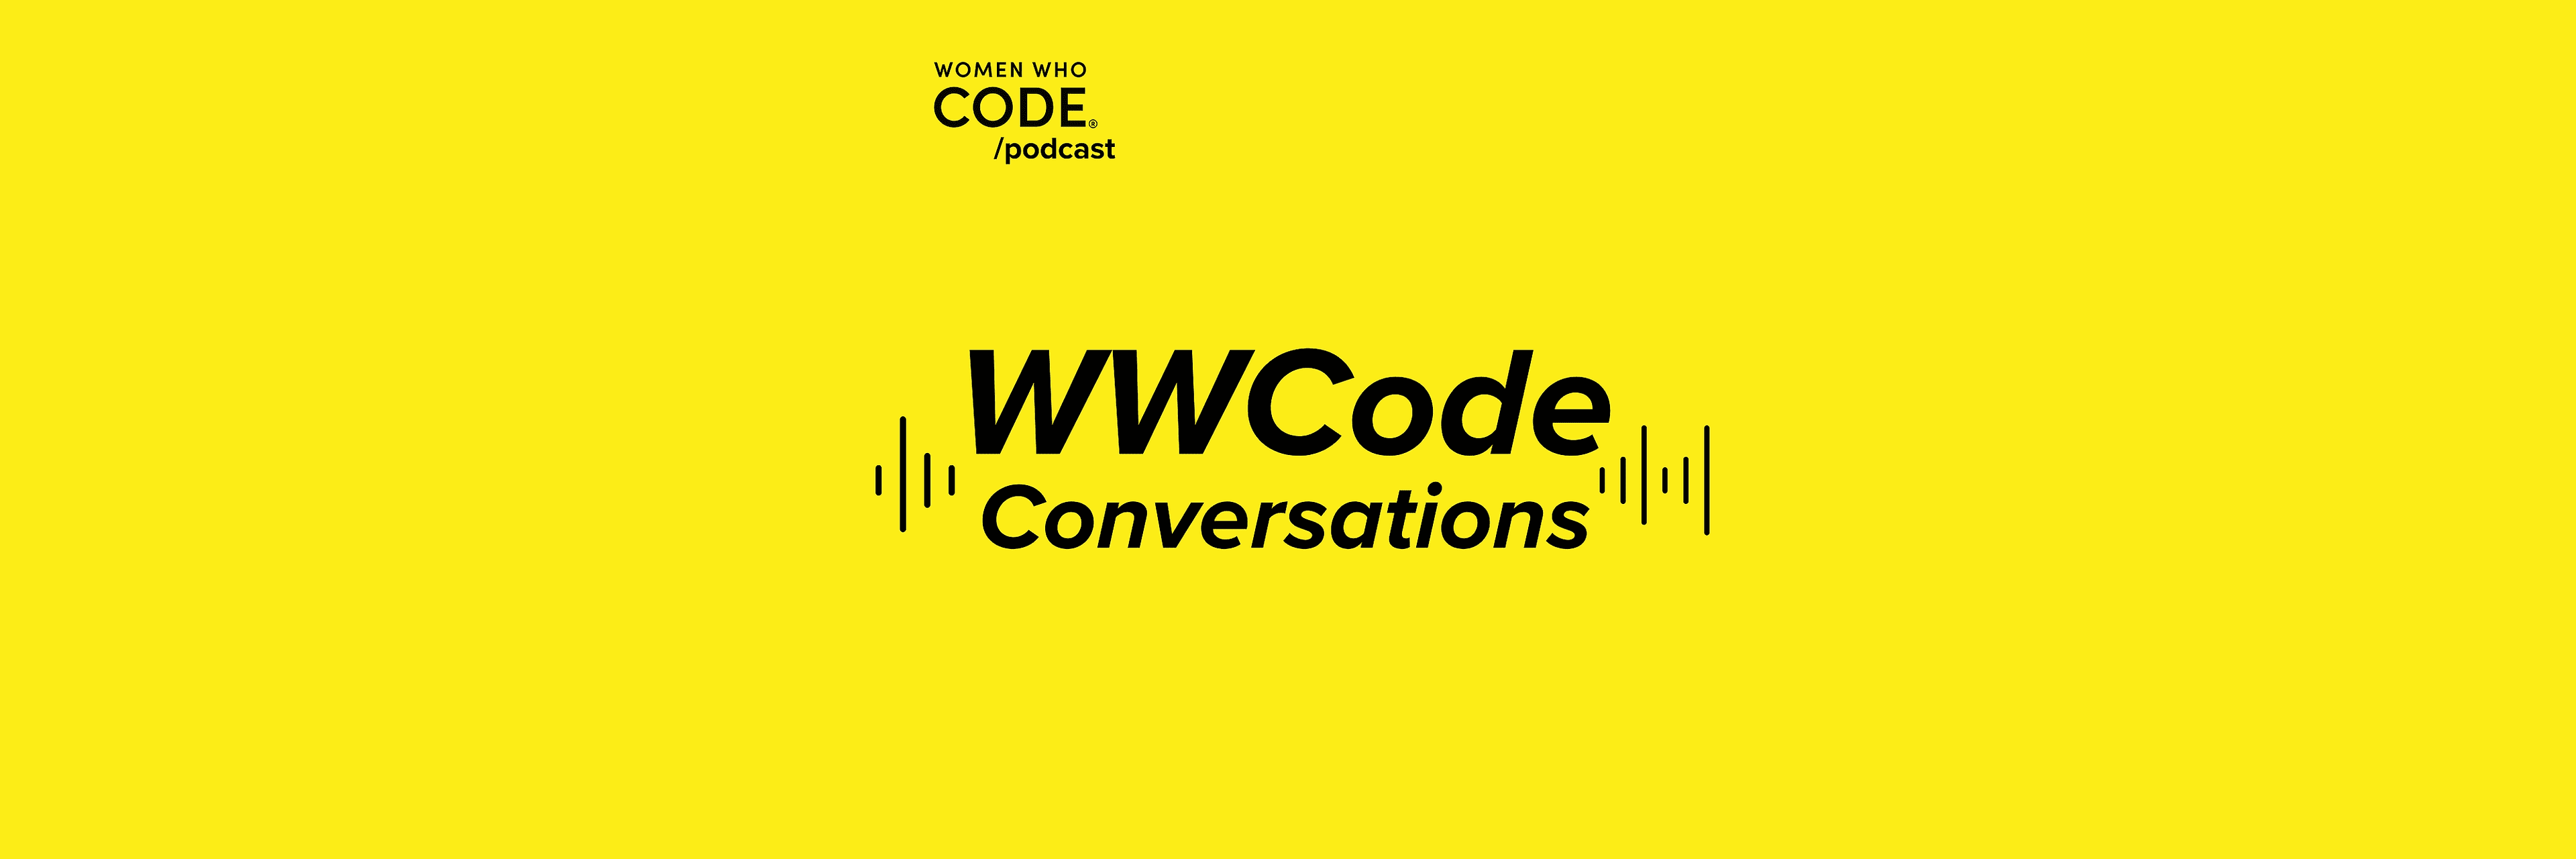 Featured image for WWCode Conversations #80: Mansi Shah, Chief Technologist at VMware